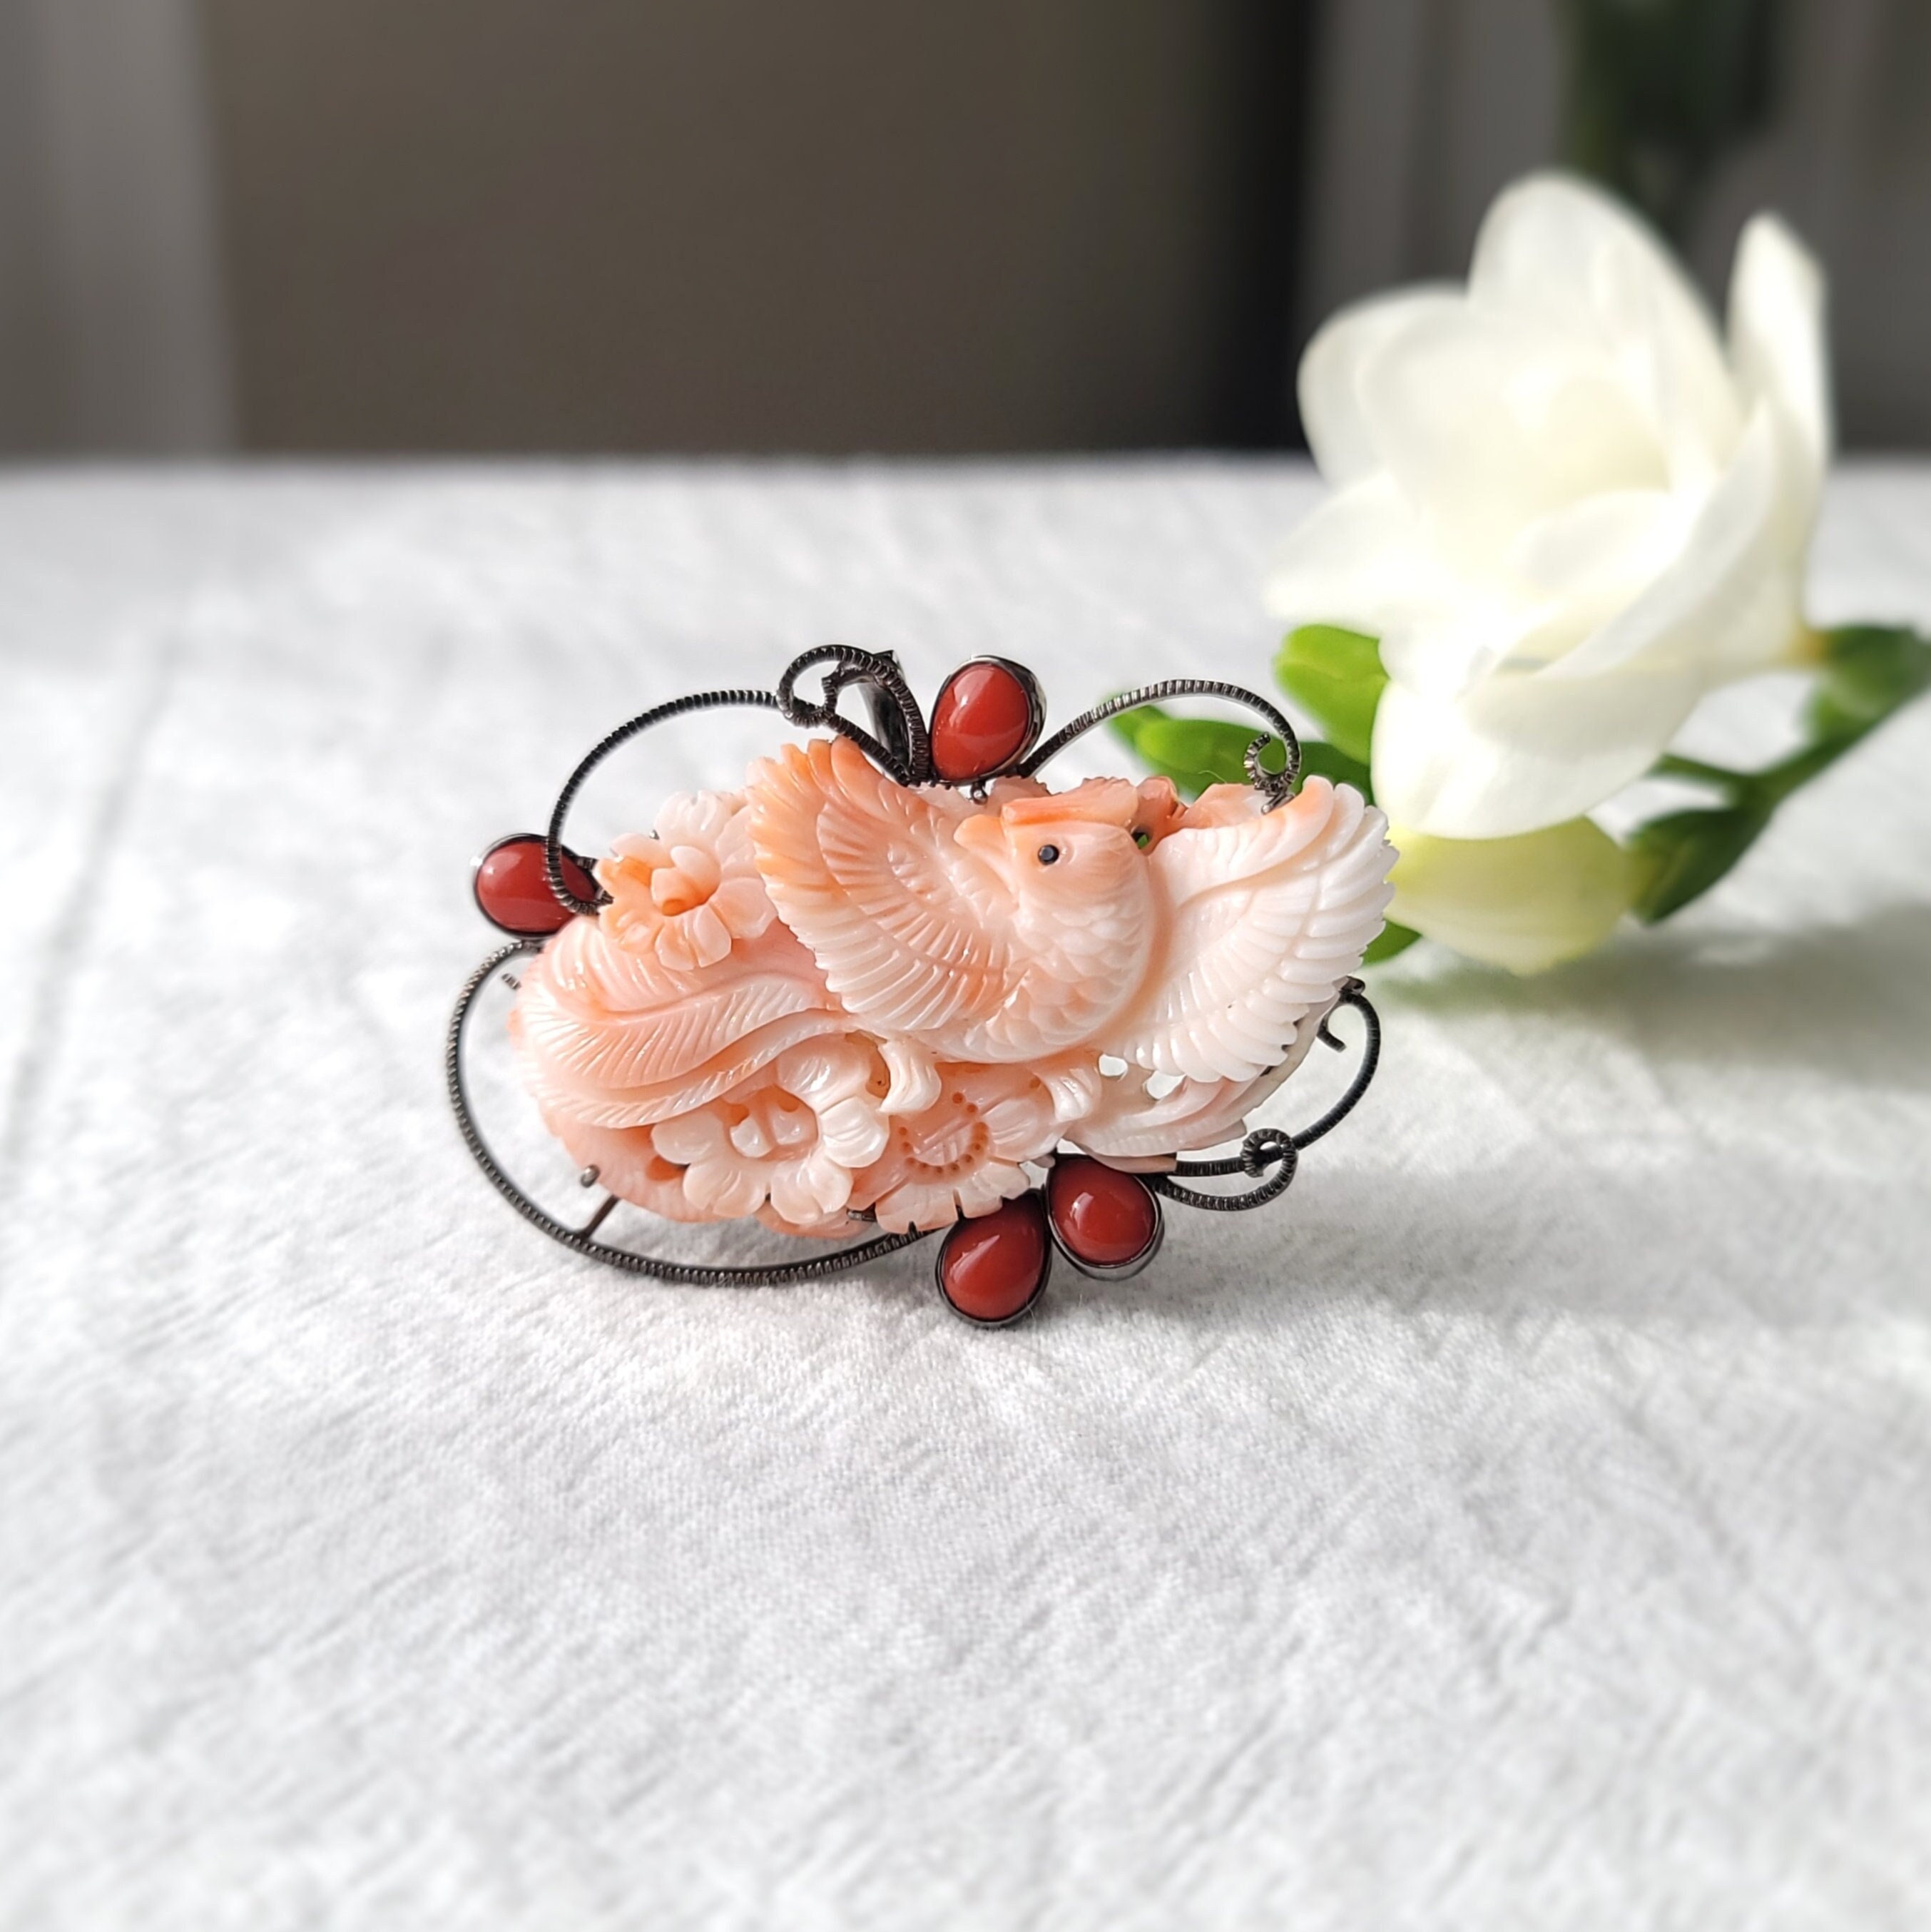 beaded coral necklace, genuine salmon pink coral, pastel pink coral  jewelry, vintage inspired,925 sterling silver lobster clasp,gift for her 8  mm